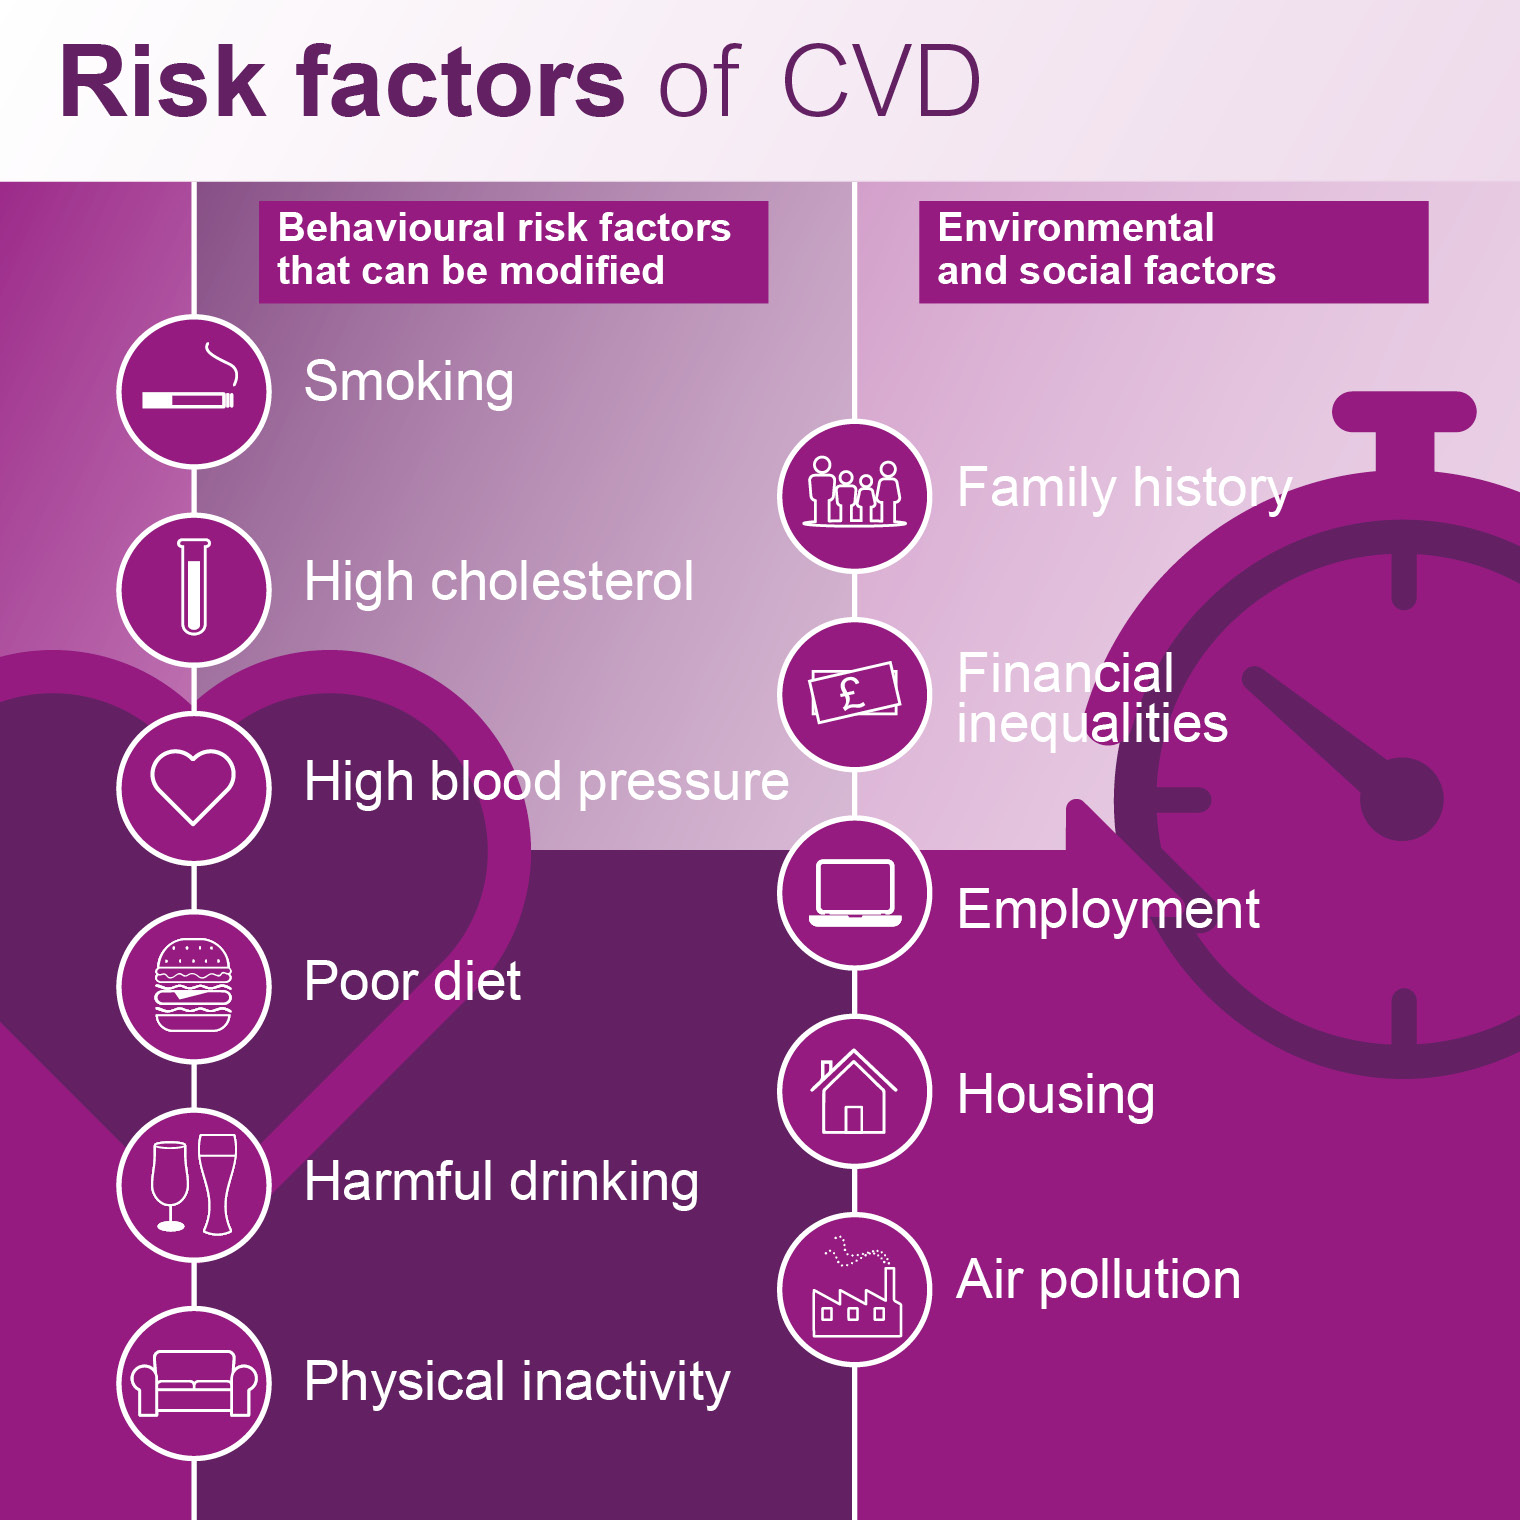 Risk factors of CVD...Behavioural risk factors that can be modified: •Smoking (cigs) •	High cholesterol (drop of blood) •	High blood pressure (heart) •	Poor diet (burger or something equally unhealthy) •	Harmful drinking (image of bottle of wine or pint) •	Physical inactivity (sofa)  Environmental and social factors include: •	Family history (family) •	Financial inequalities (money) •Employment  •	Housing (house) •Air pollution (factory)